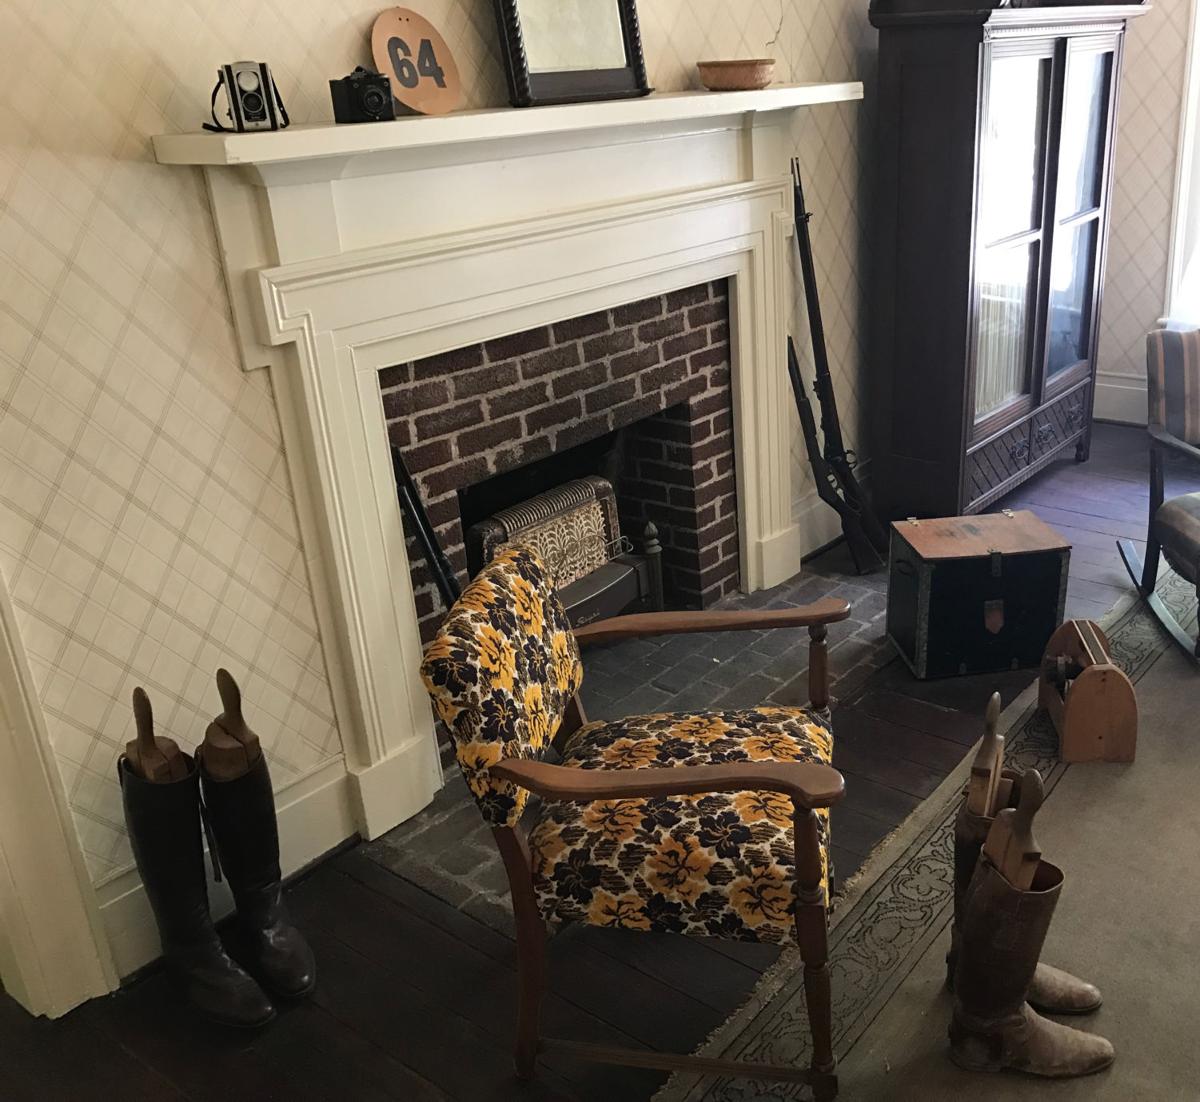 Graves Fireplace Fresh Faulkner S Home Preserved just as It Was In Mississippi